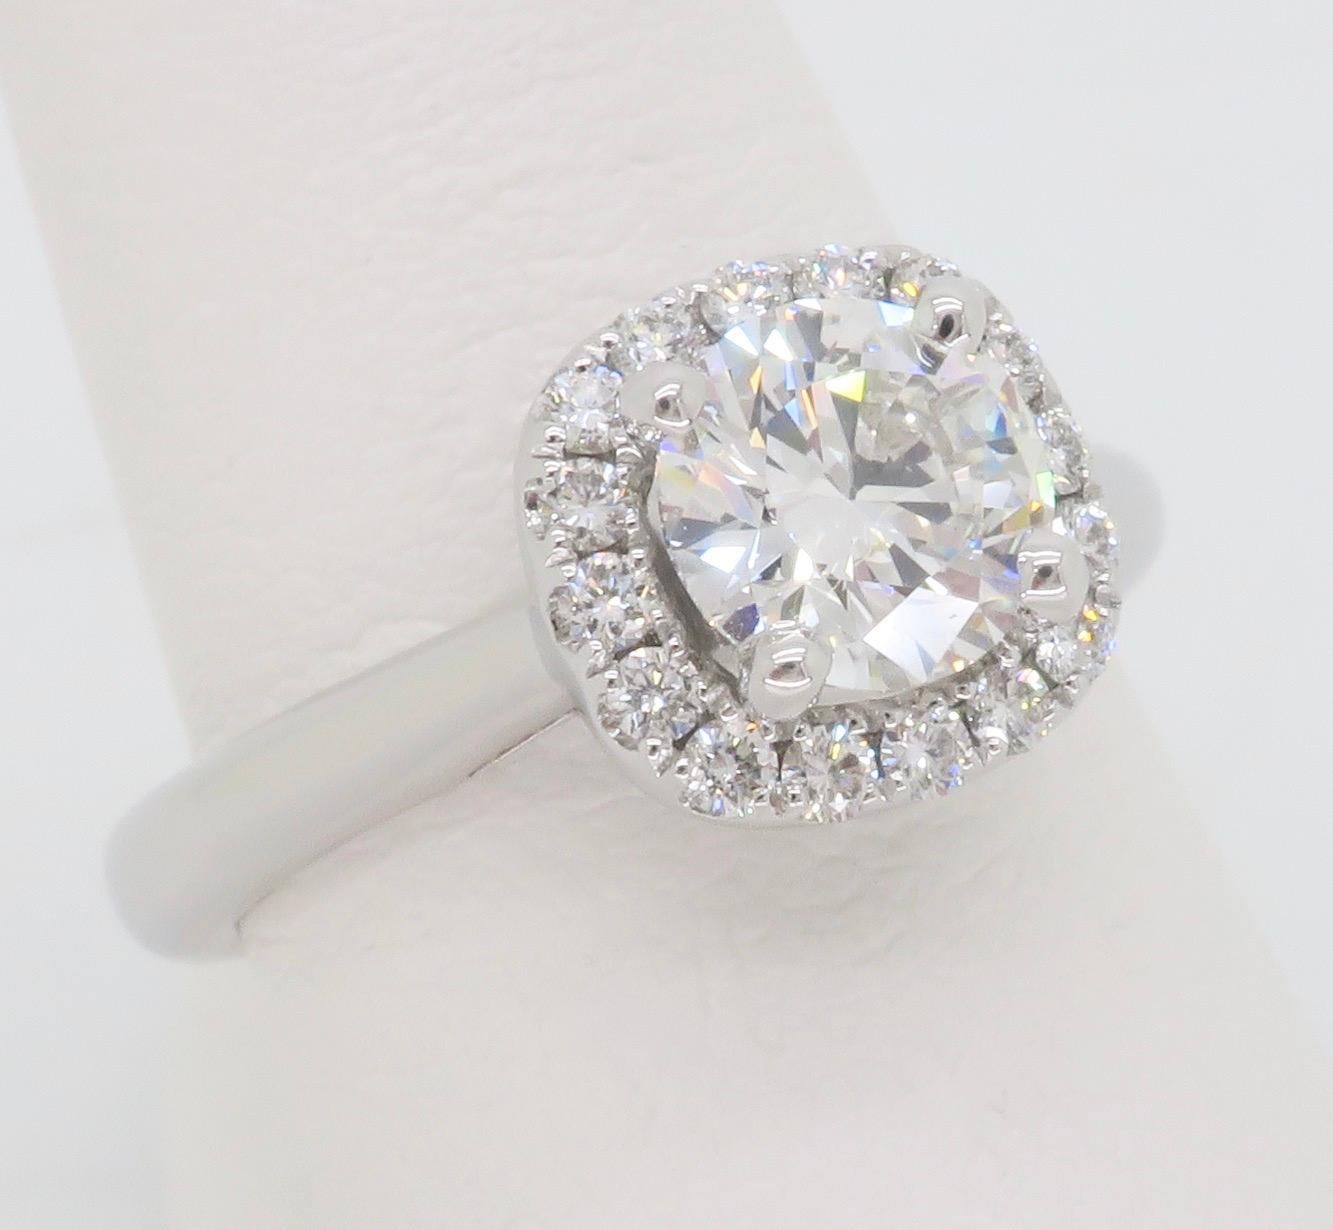 GIA Certified Round Brilliant Cut Diamond in a Stunning Scott Kay Halo Setting  For Sale 1